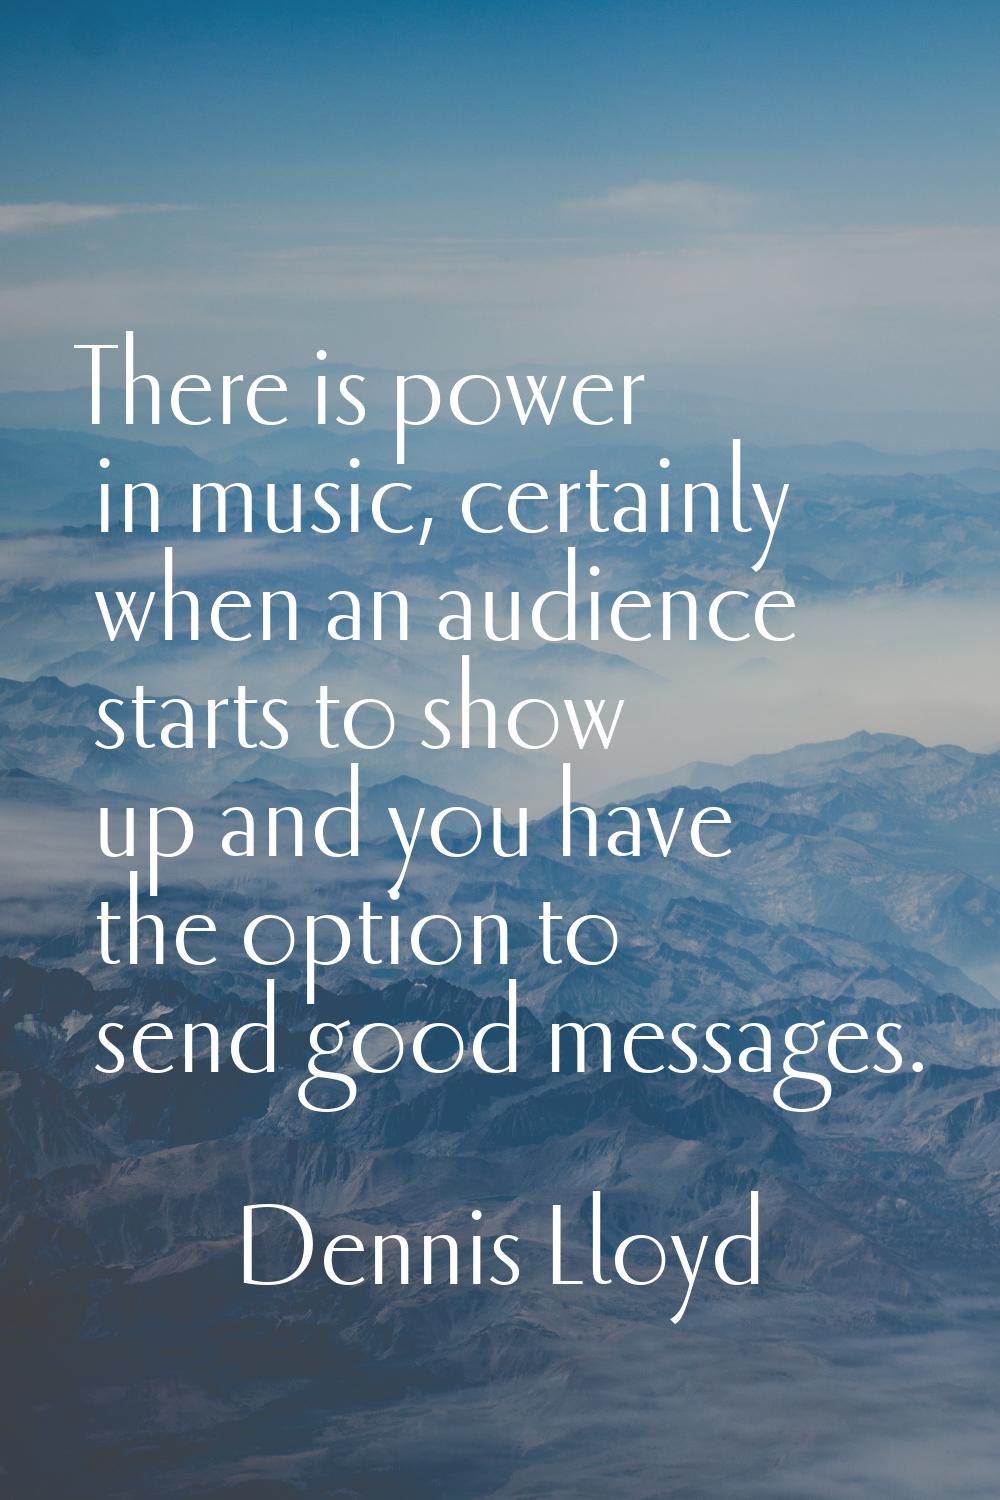 There is power in music, certainly when an audience starts to show up and you have the option to se